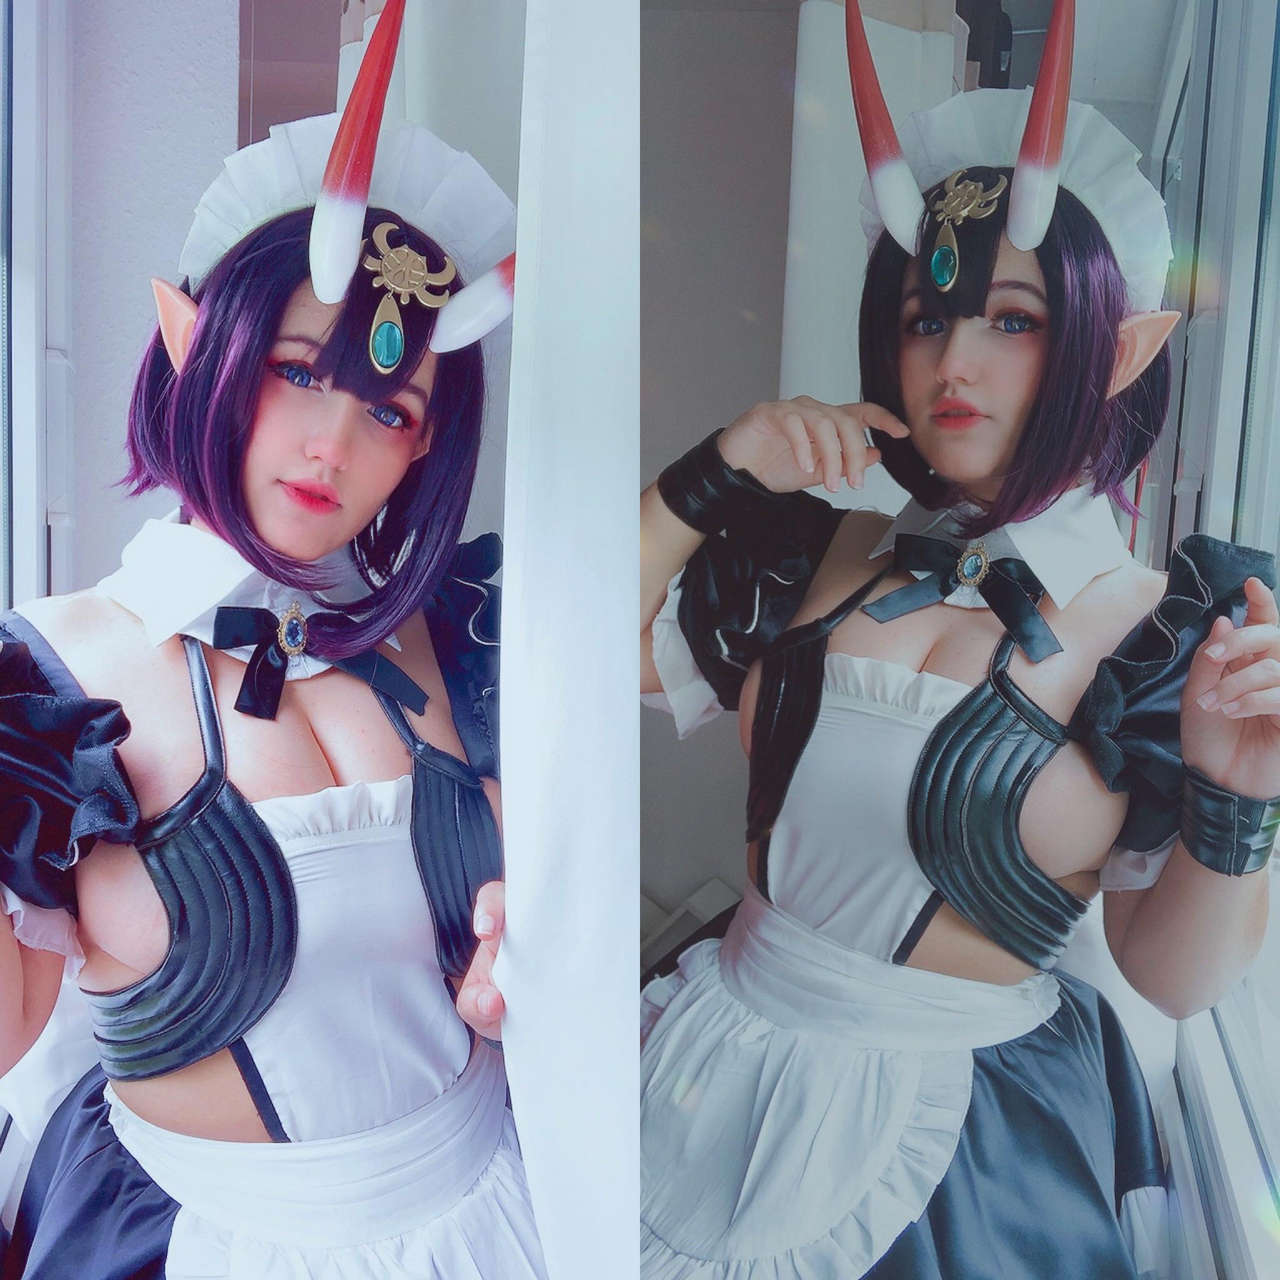 I Was Never Expecting My Last Post To Blow Up Here Thank You For All Of The Love You Ve Given I Ll Leave Another Of My Cosplays Here Shuten Doji By Me Aka Niniitar